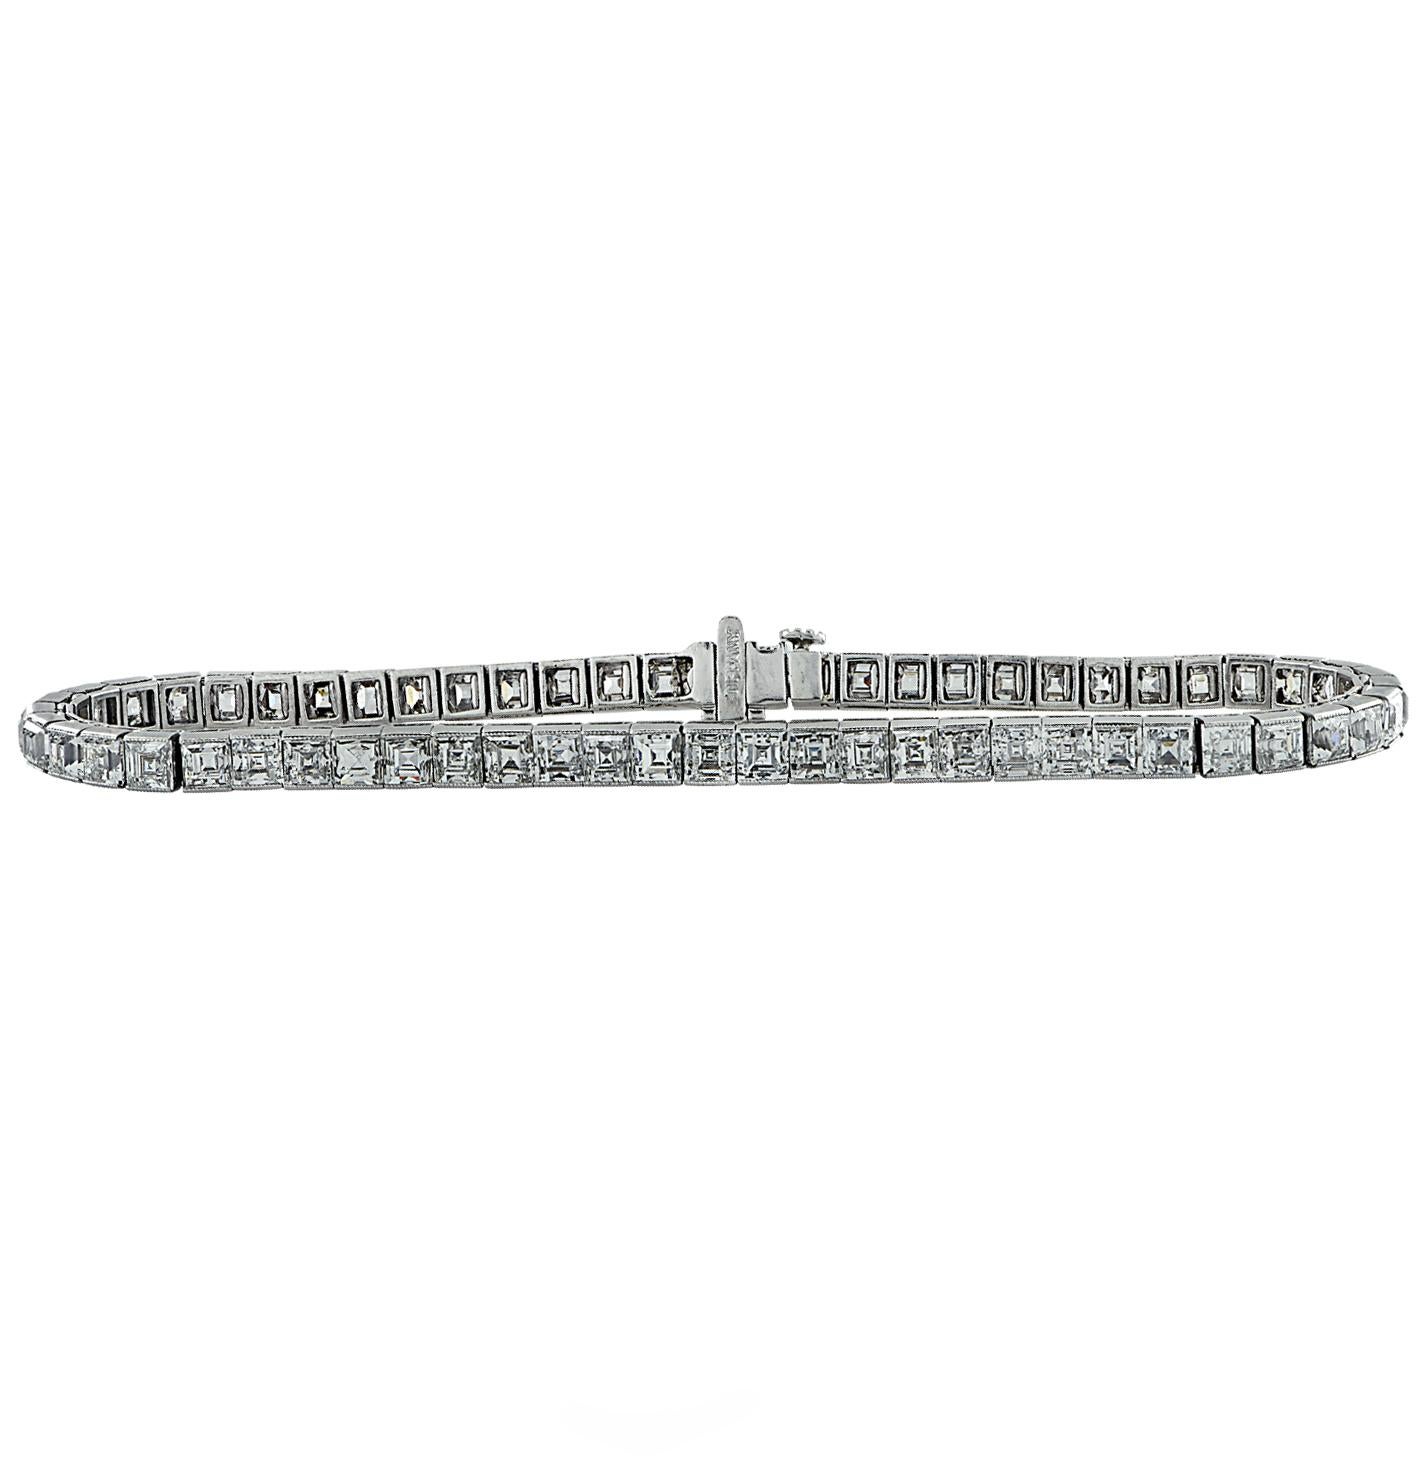 Cira 1920 Art Deco Tiffany & Co Platinum carre cut diamond tennis bracelet featuring 60 carre cut diamonds weighing approximately 8.25 carats total, F-G Color, VS-SI clarity. The bracelet measures 7 inches in length and 3.5mm in width.  The art deco